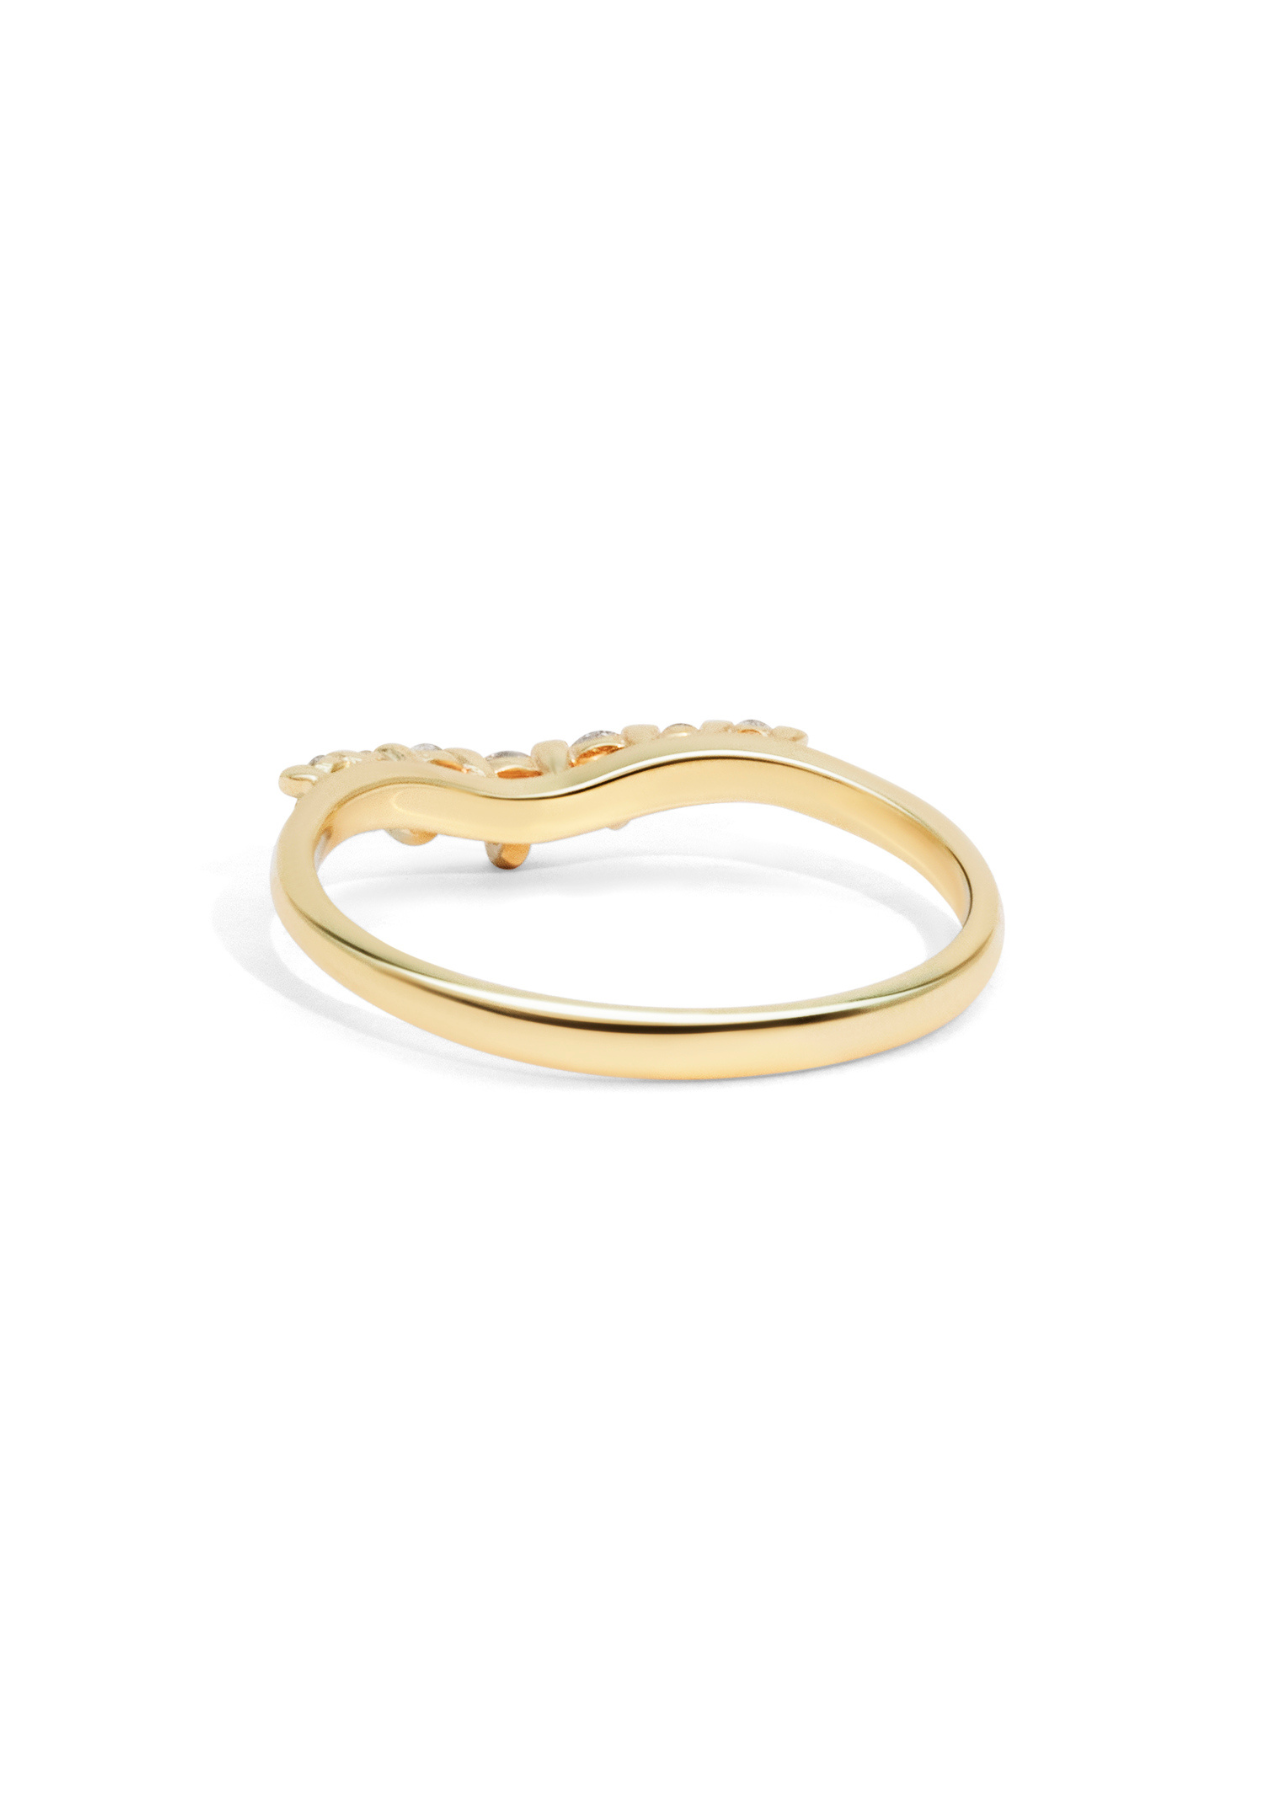 The Petal Diamond Curved Yellow Gold Band